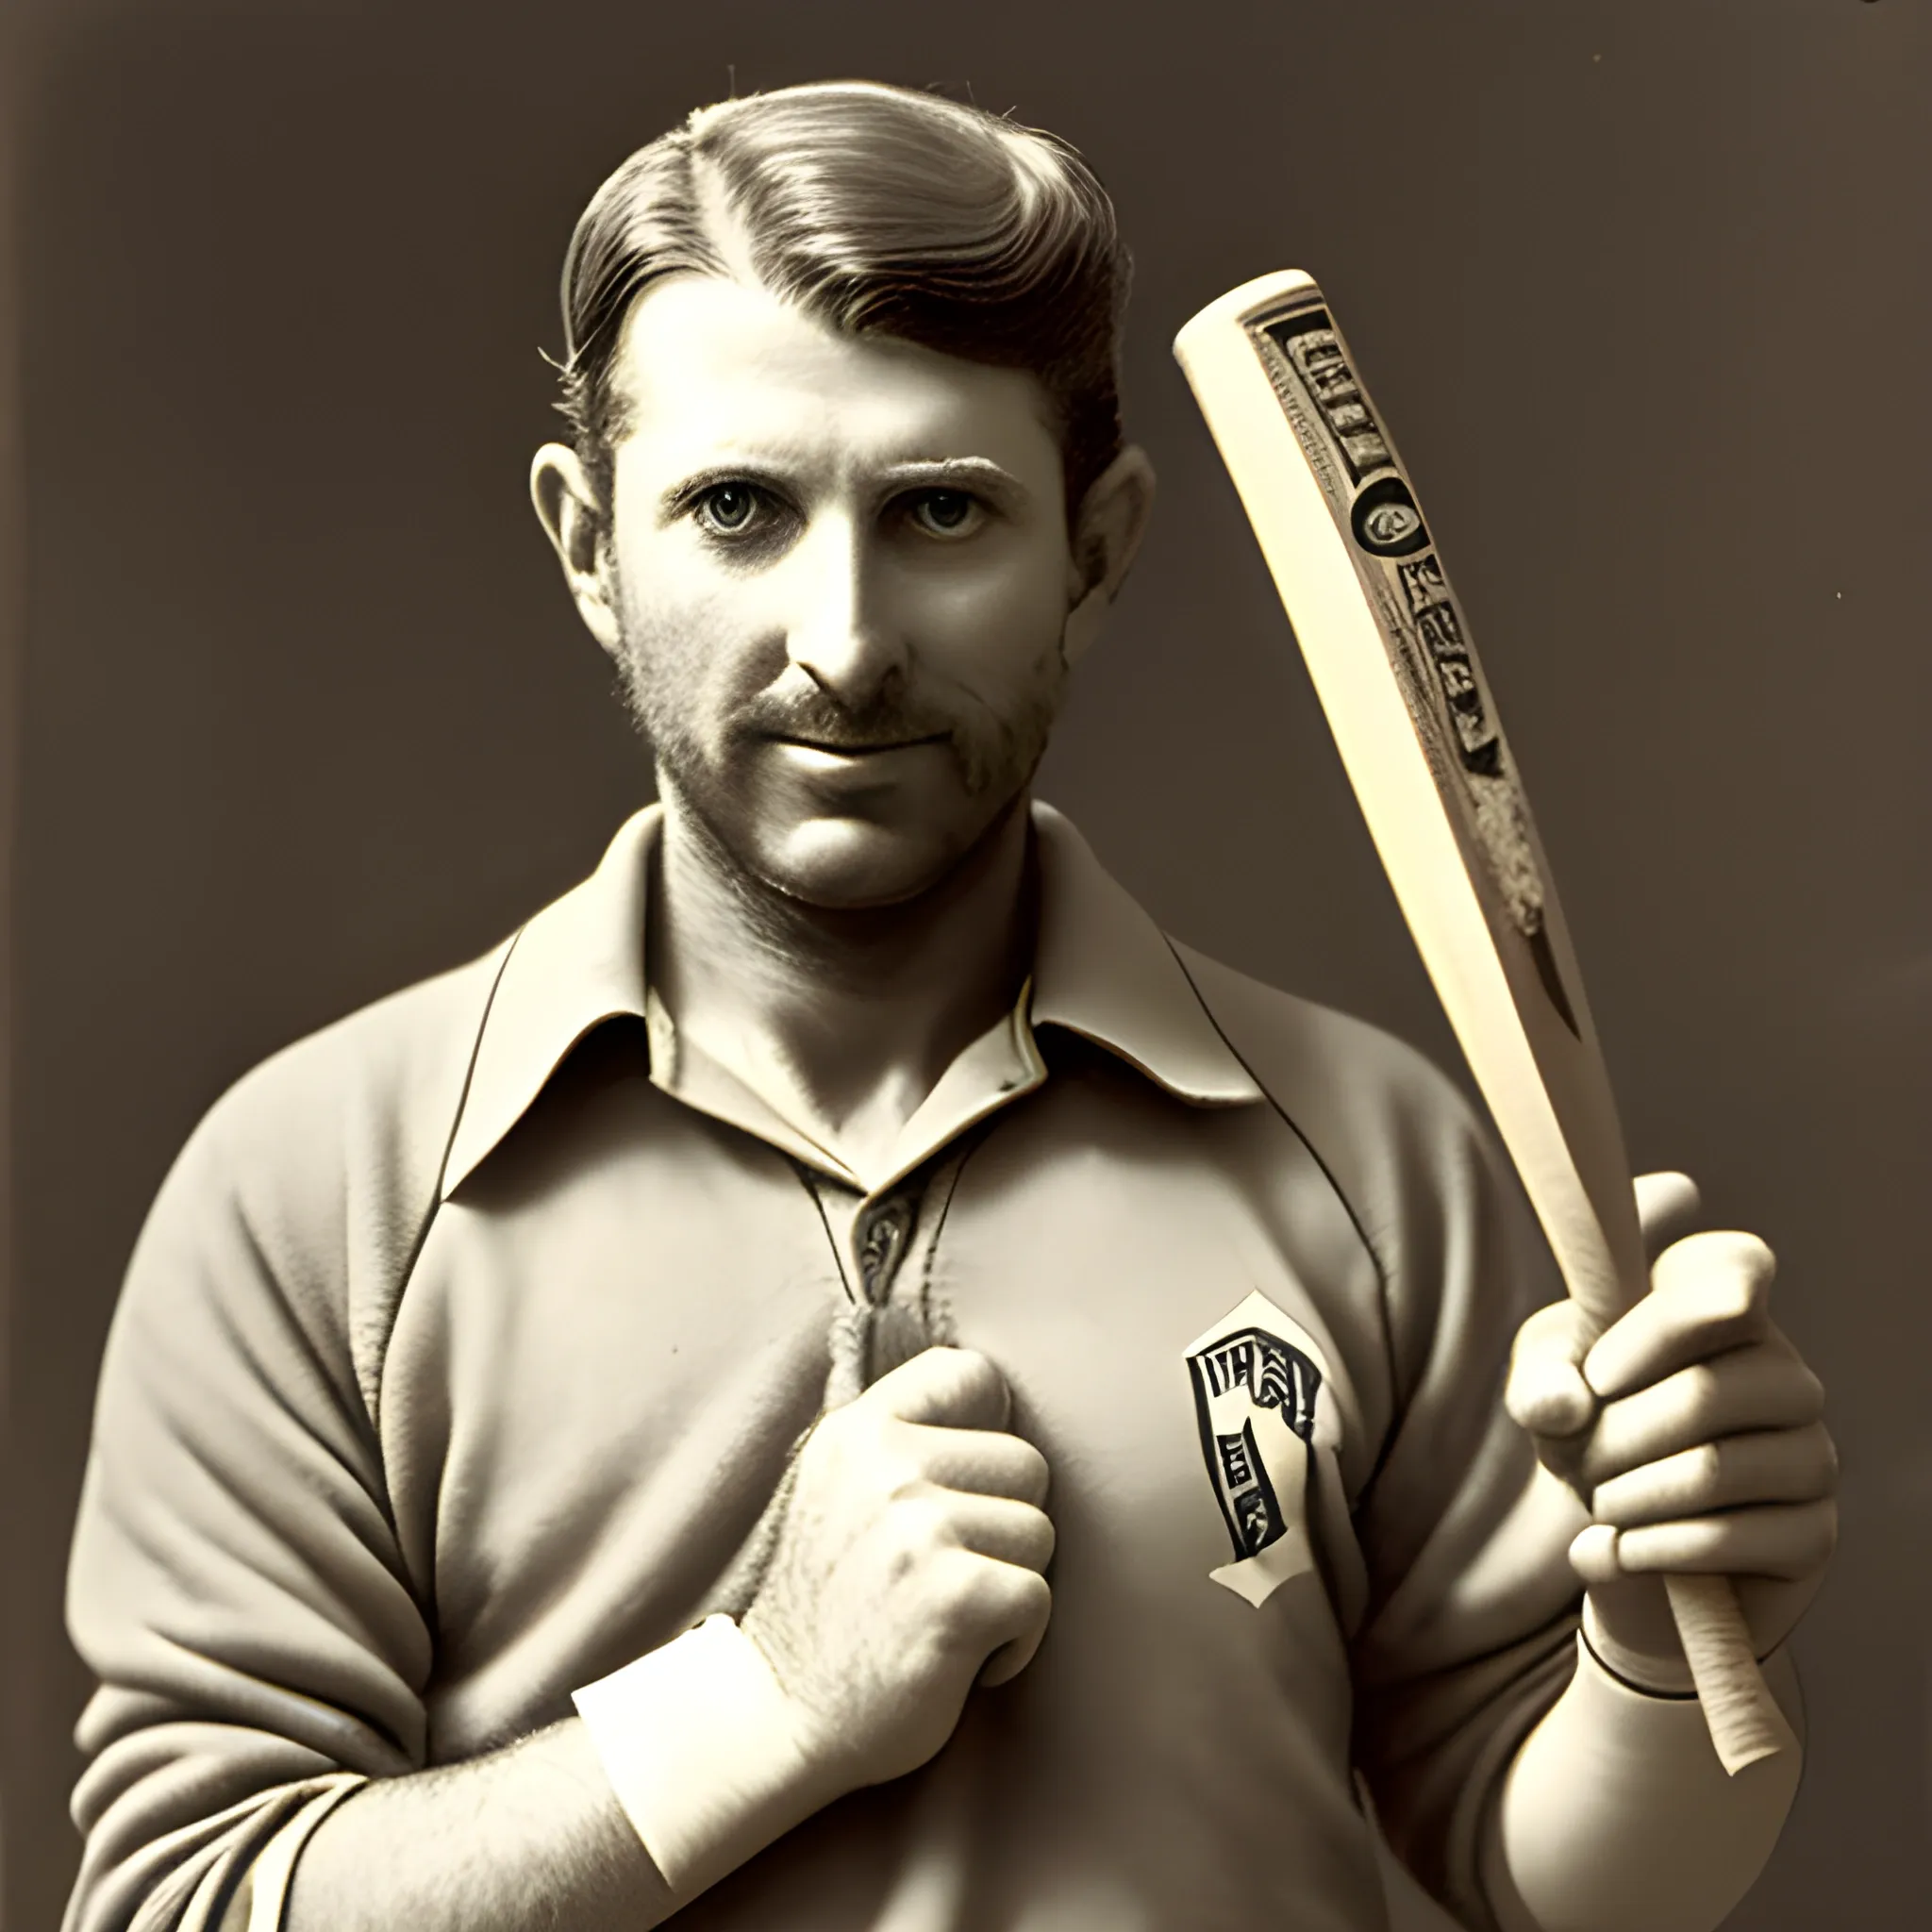 A man with cricket bat hold in his hand